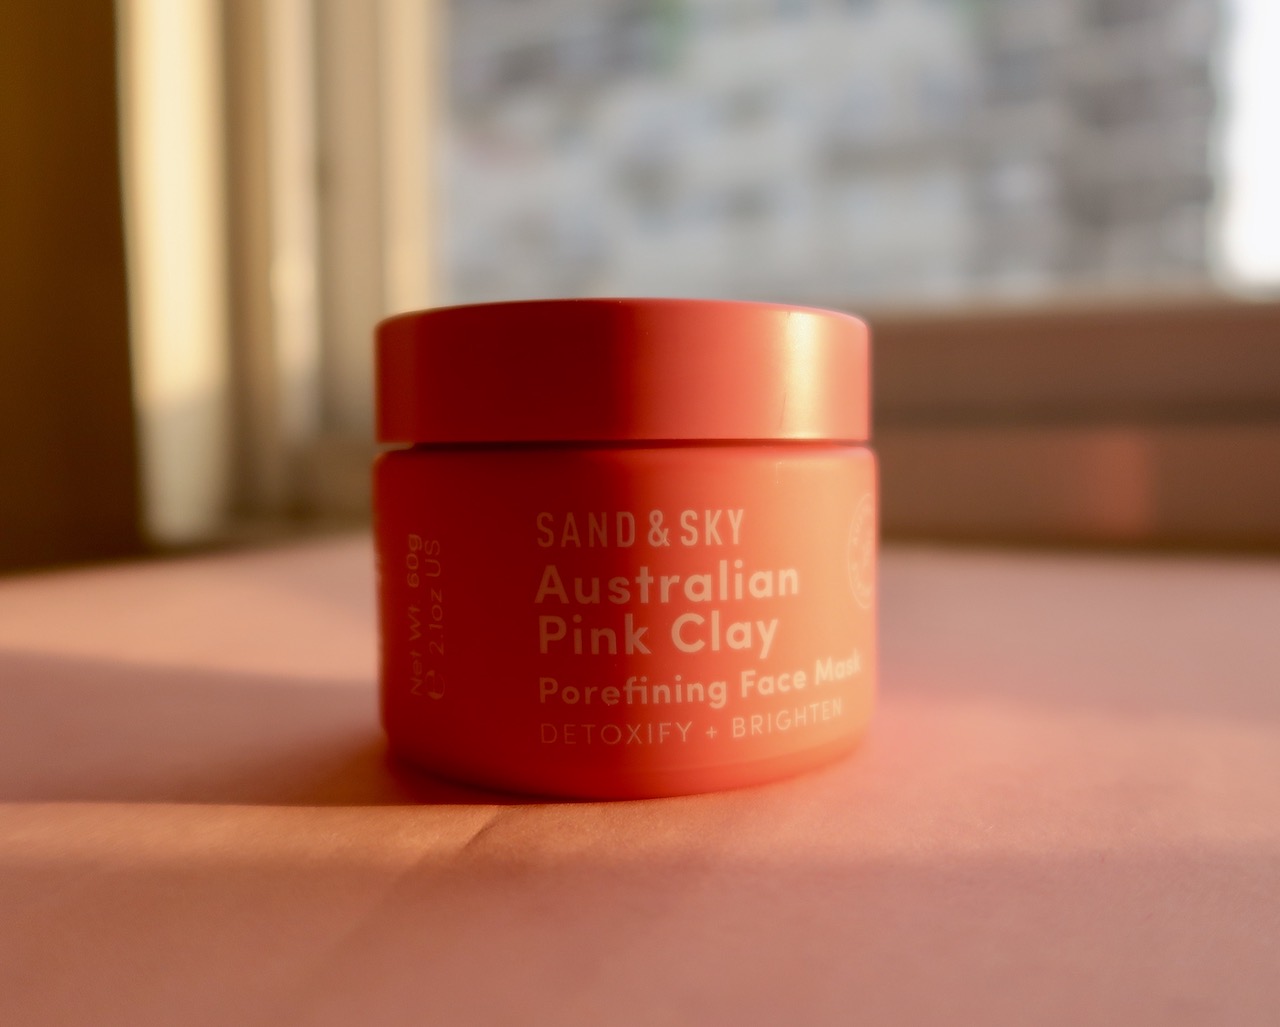 Sand and Sky Australian Pink Clay Pore Refining Face New favorite clay mask! | The Beauty